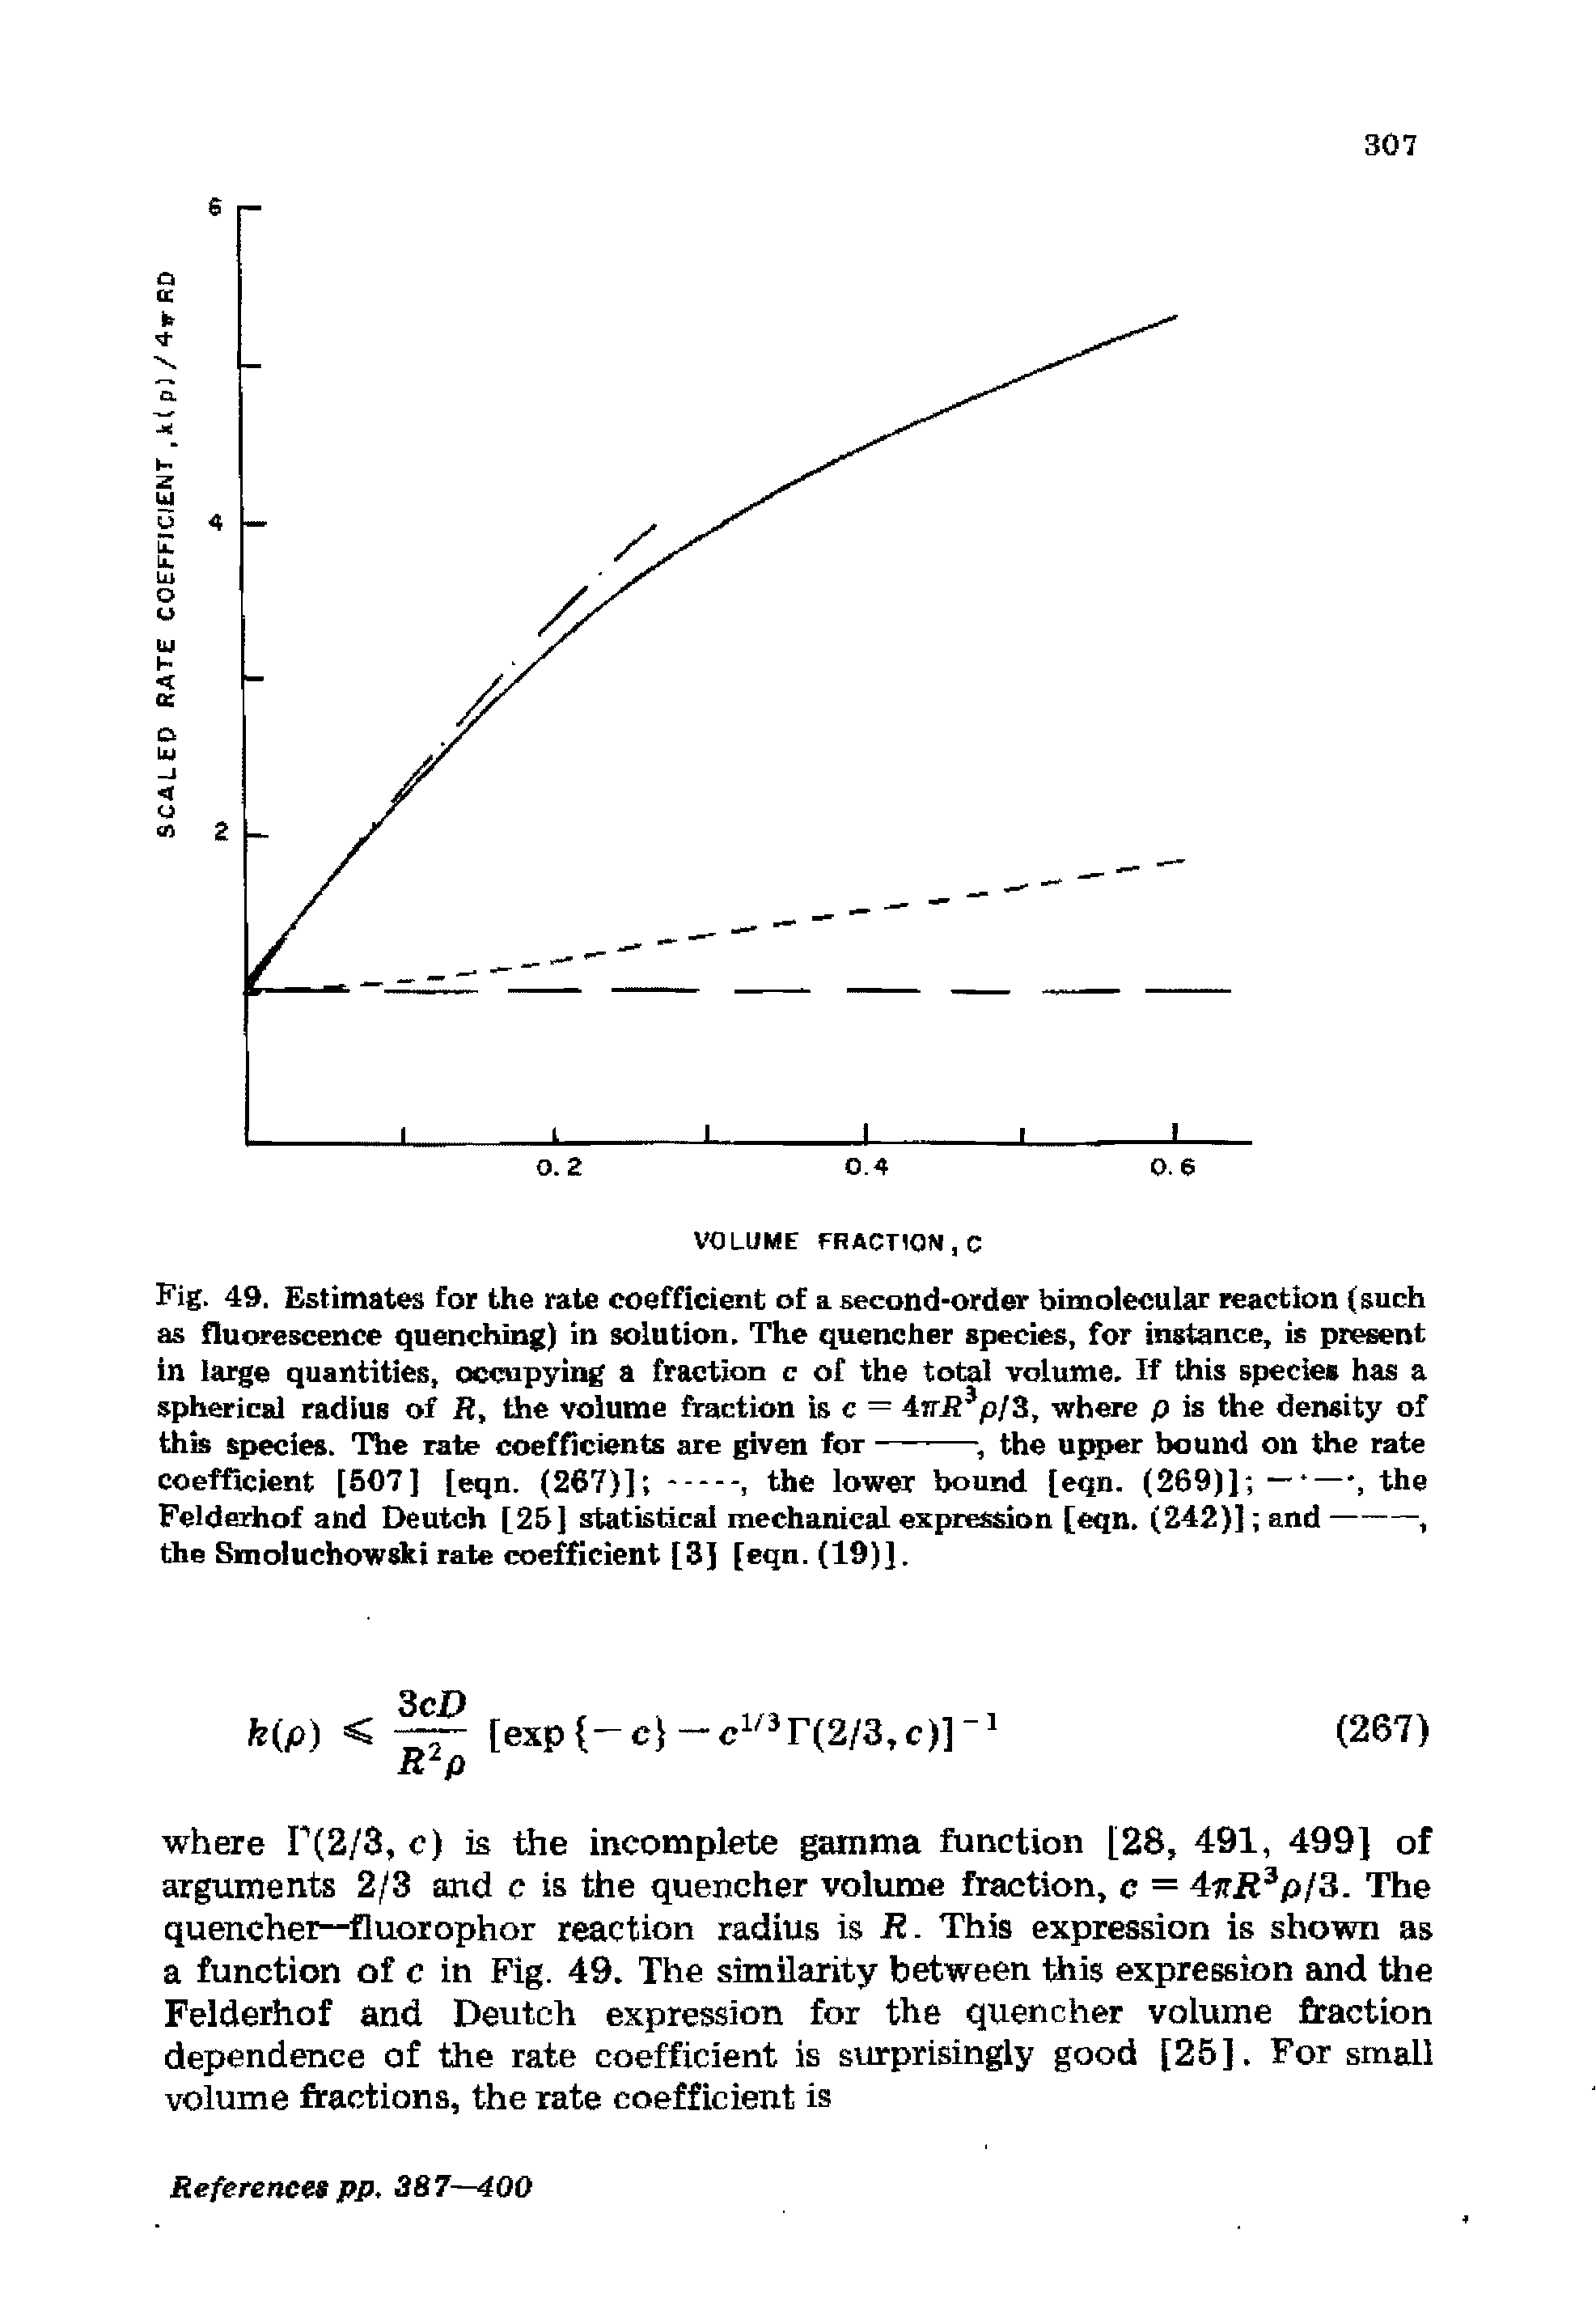 Fig. 49. Estimates for the rate coefficient of a second-order bimolecular reaction (such as fluorescence quenching) in solution. The quencher species, for instance, is present in large quantities, occupying a fraction c of the total volume. If this species has a spherical radius of R, the volume fraction is c = 4irI Jp/3, where p is the density of...